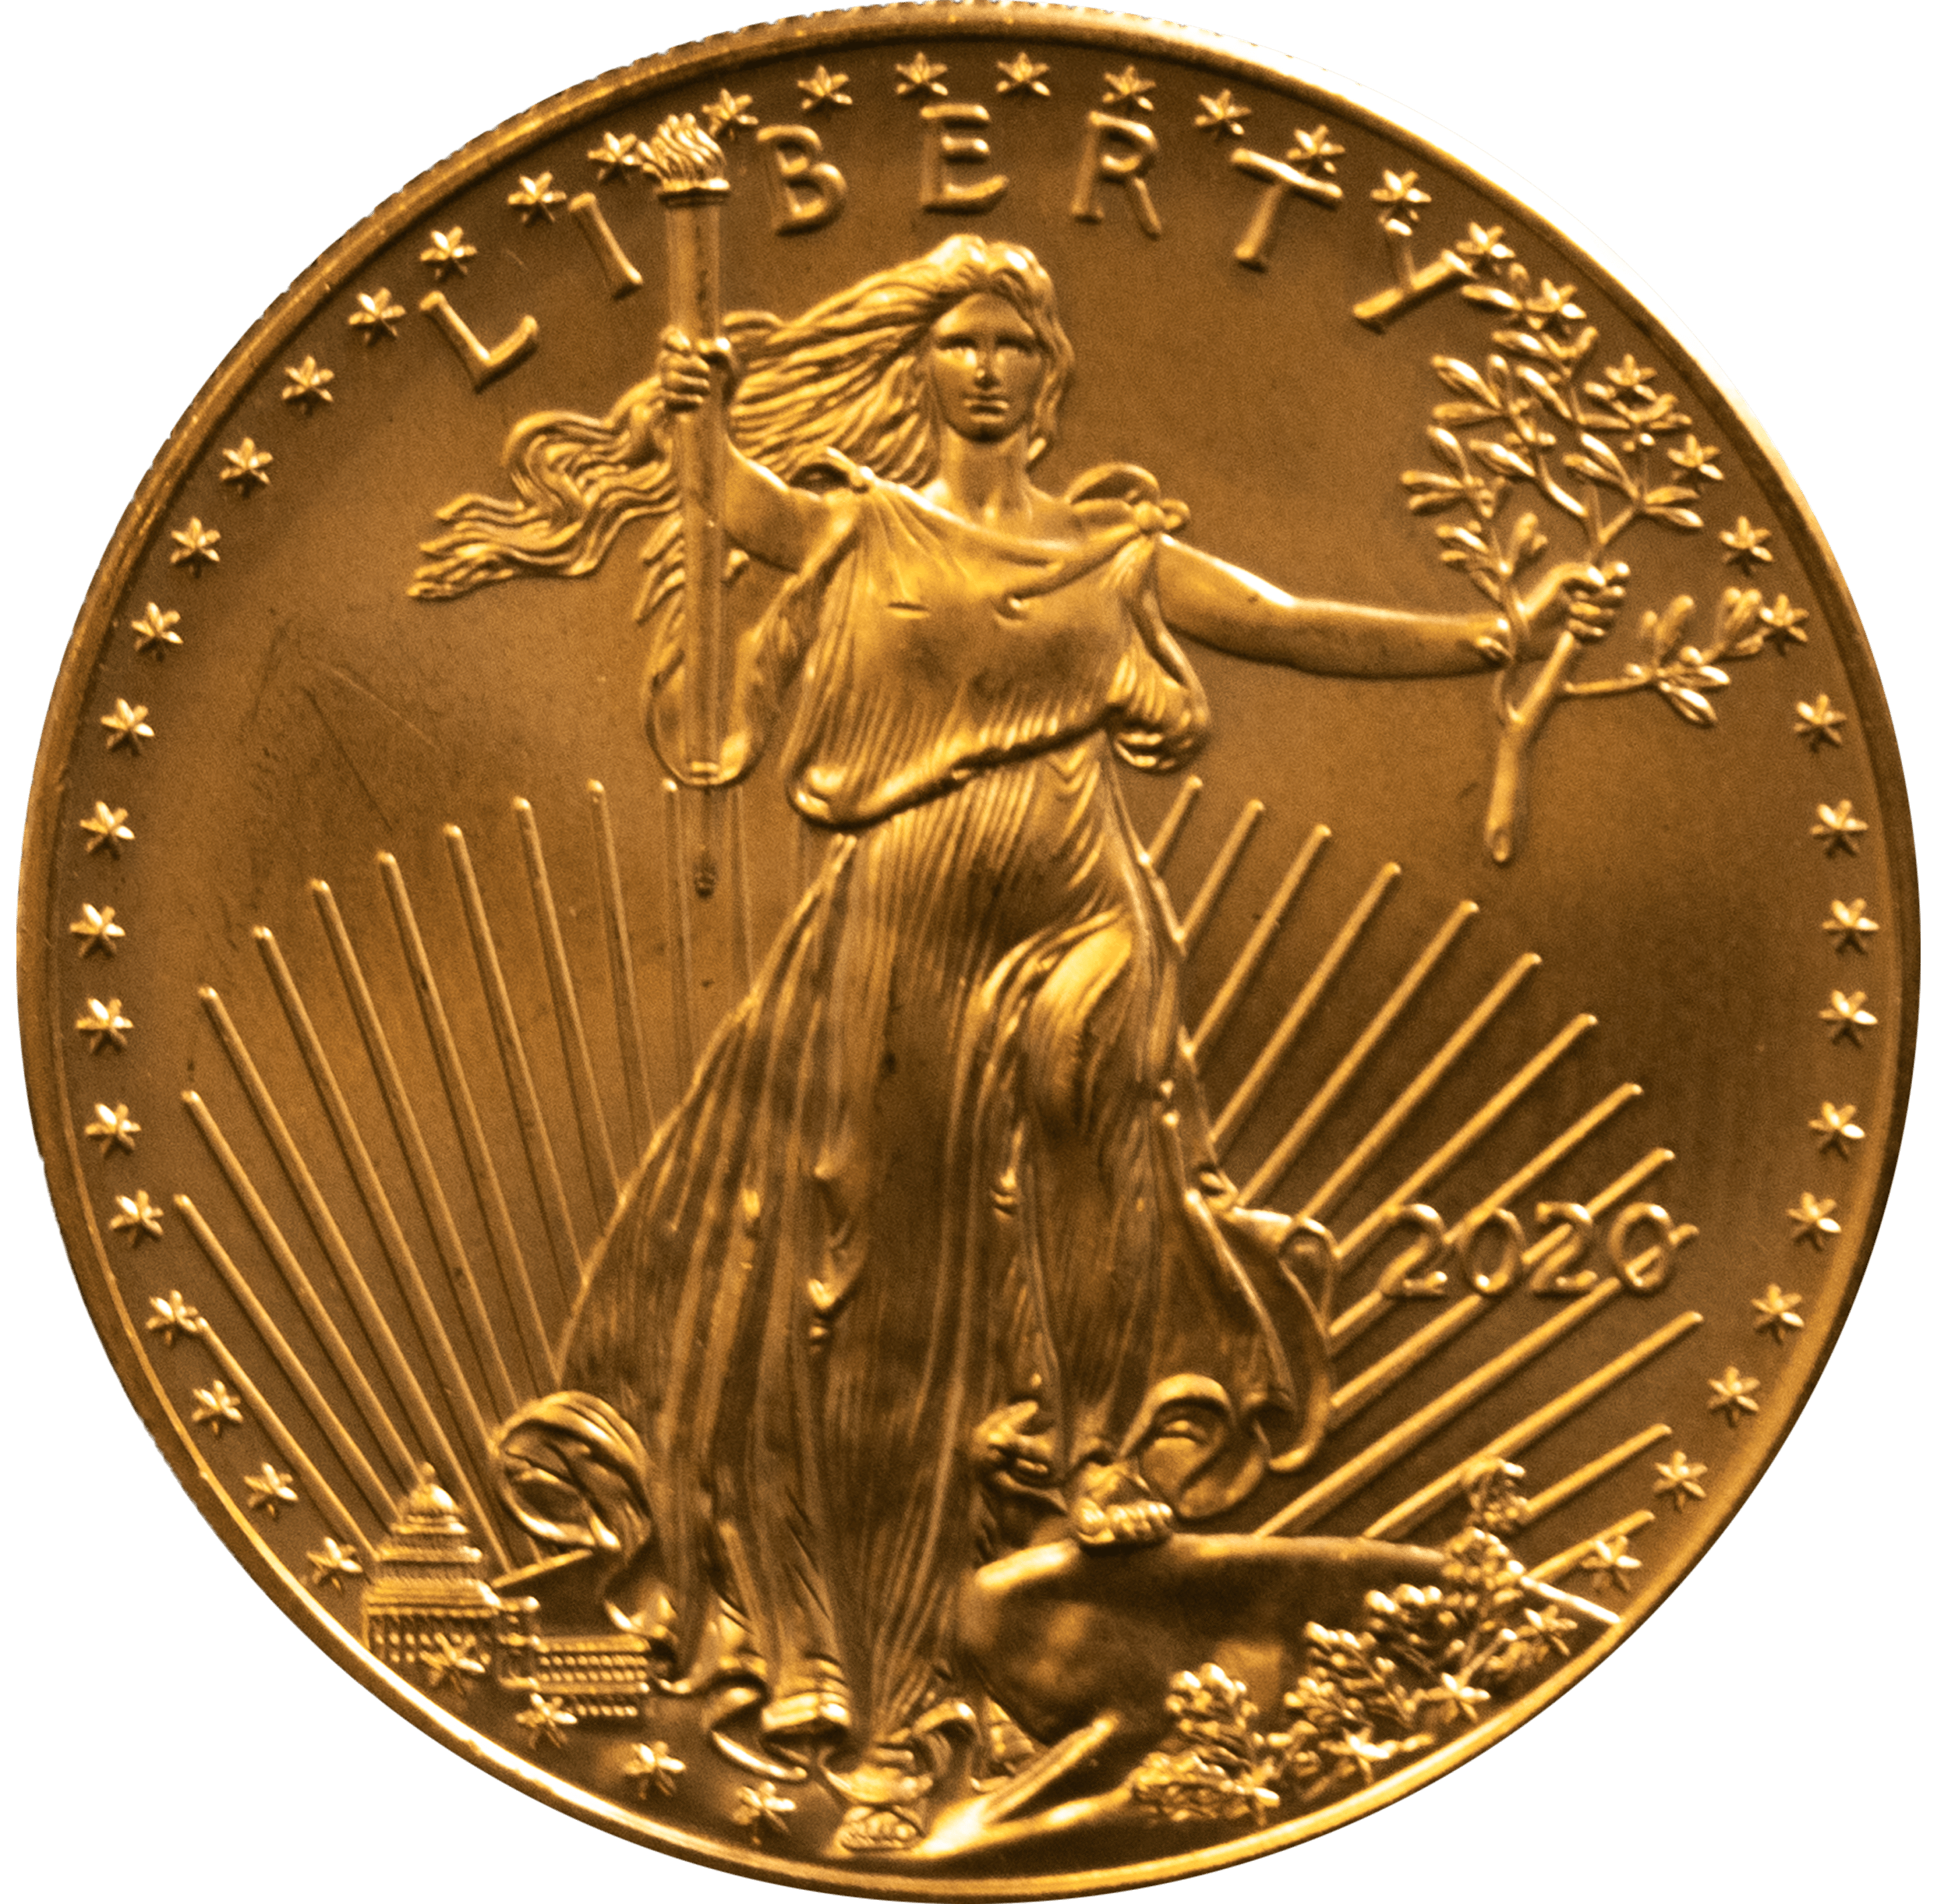 Buy American Gold Eagles from Accurate Precious Metals